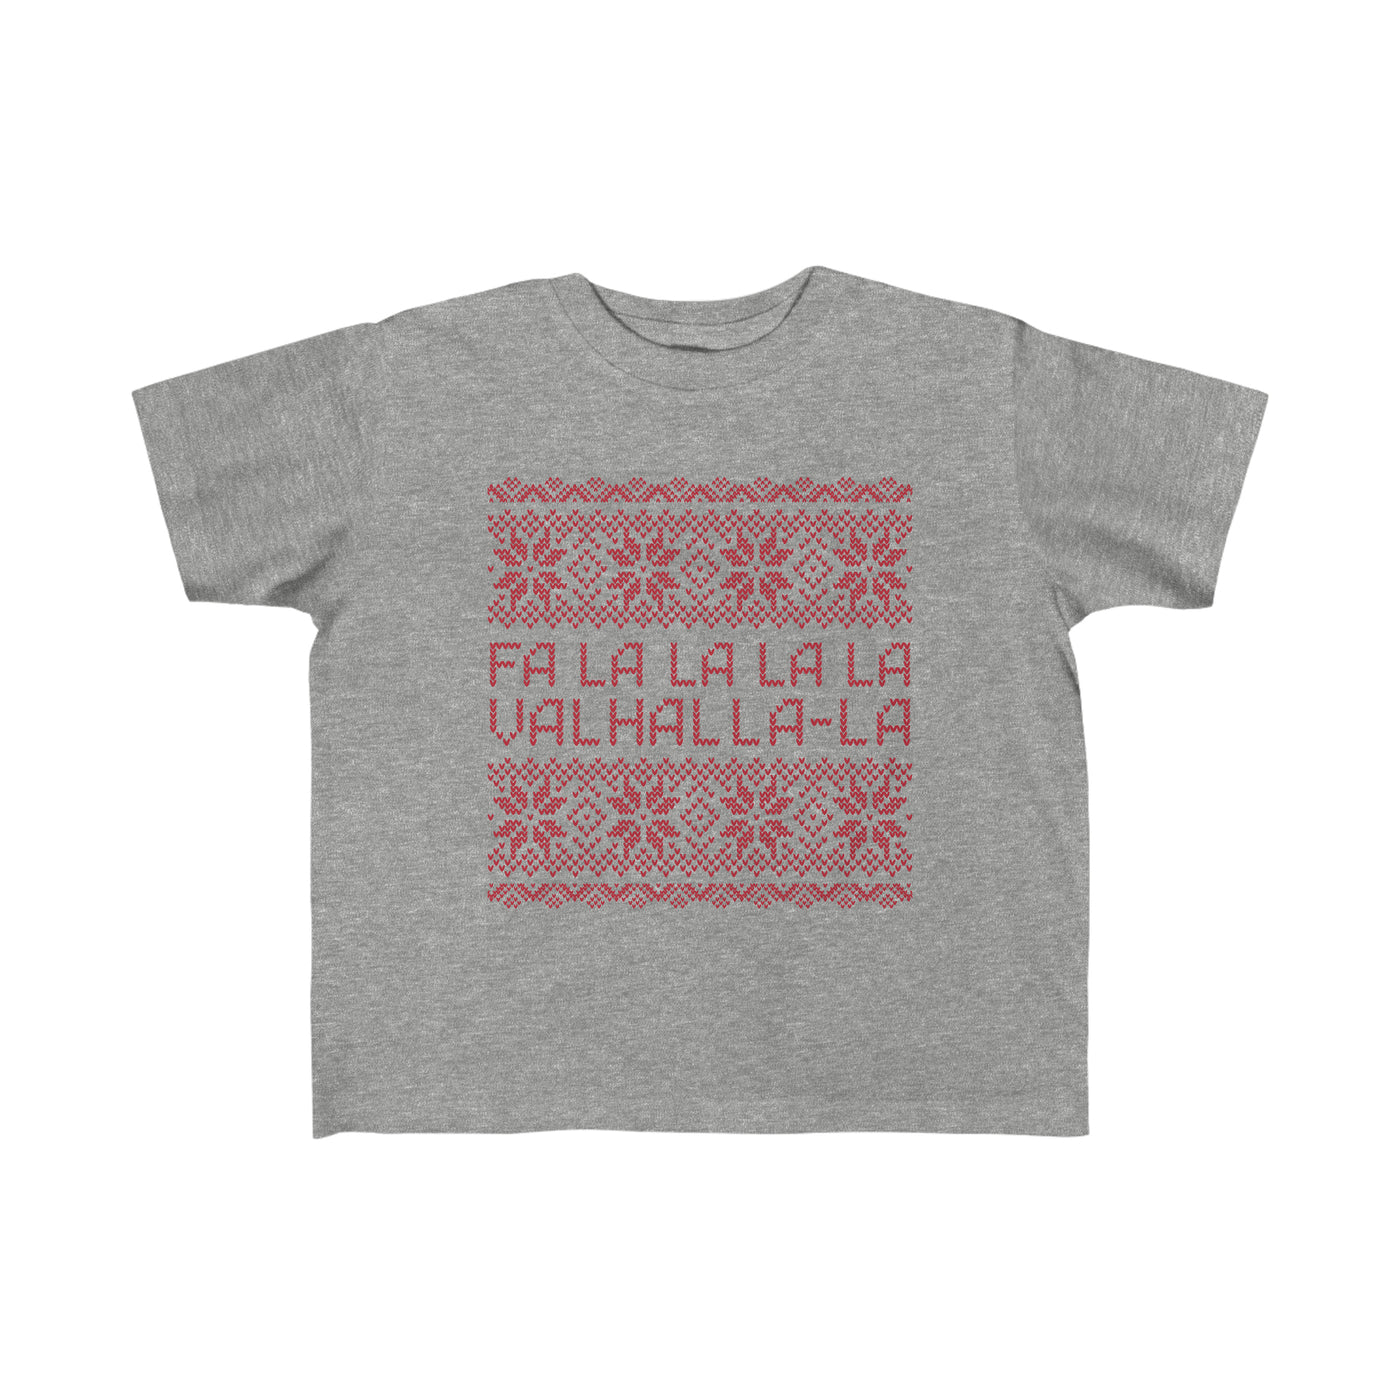 Valhalla Ugly Sweater Toddler Tee